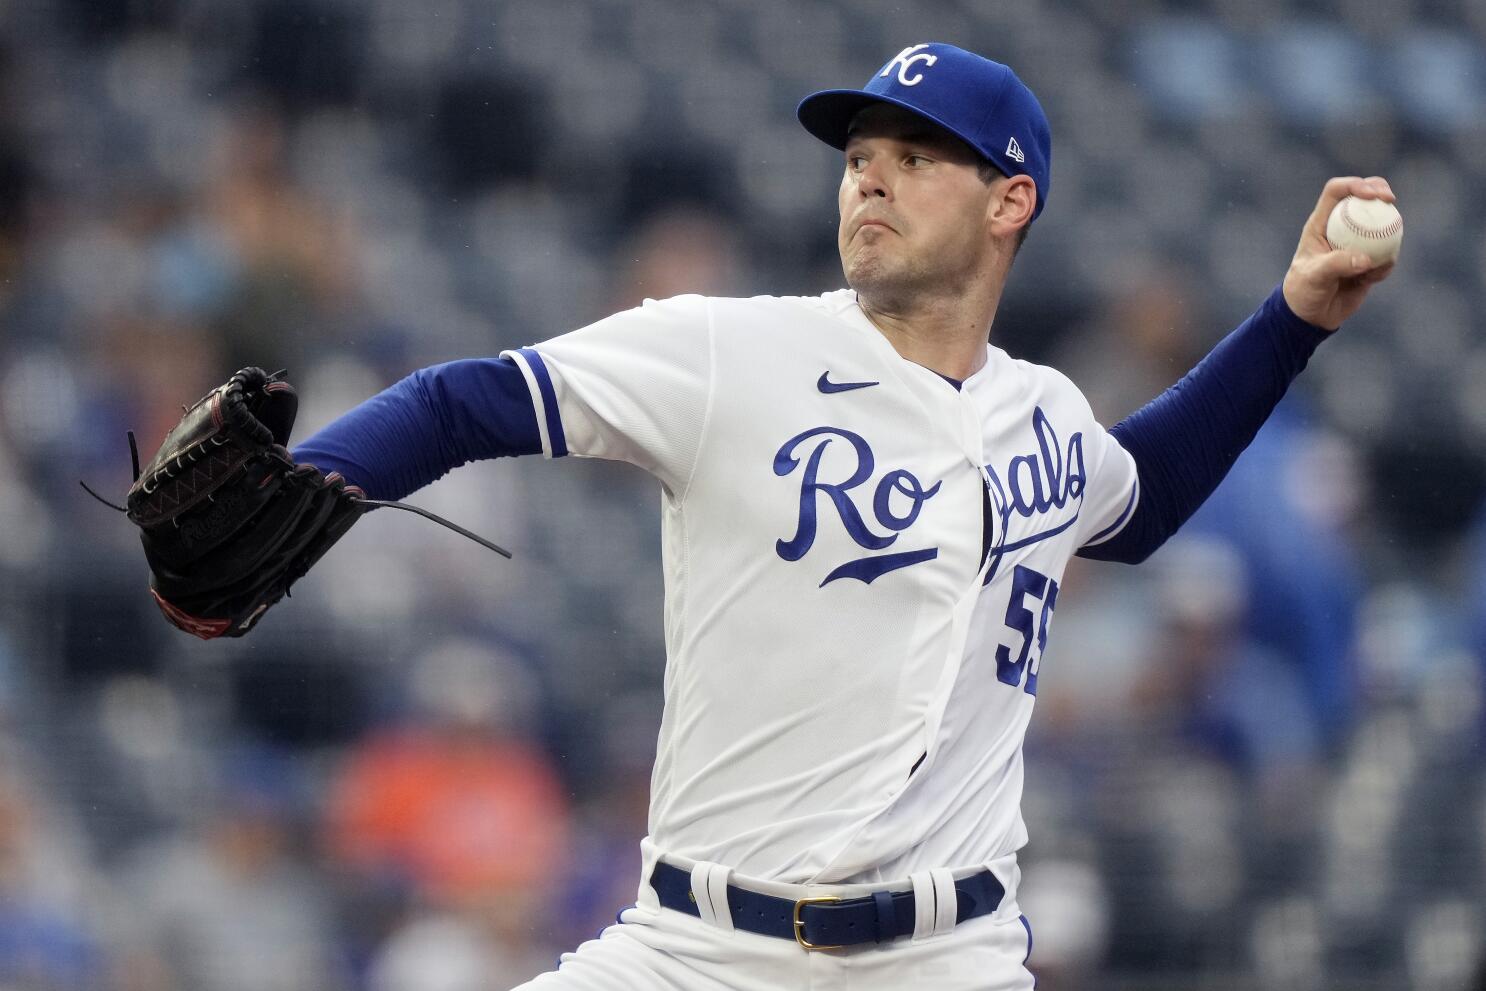 Royals rookie Michael Massey gets 2 hits in first MLB start